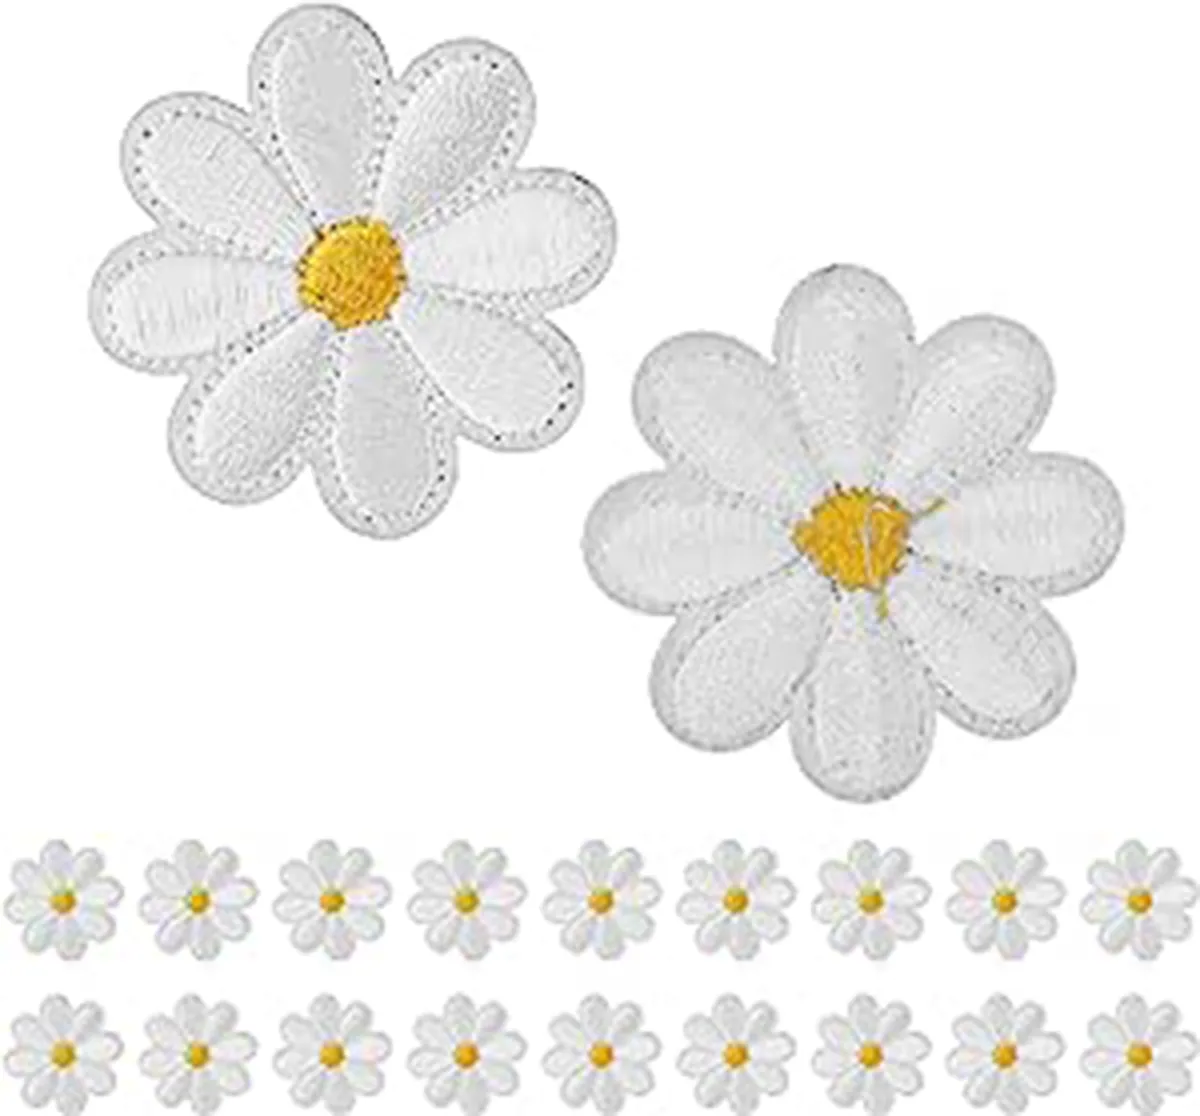 Daisy iron on patches